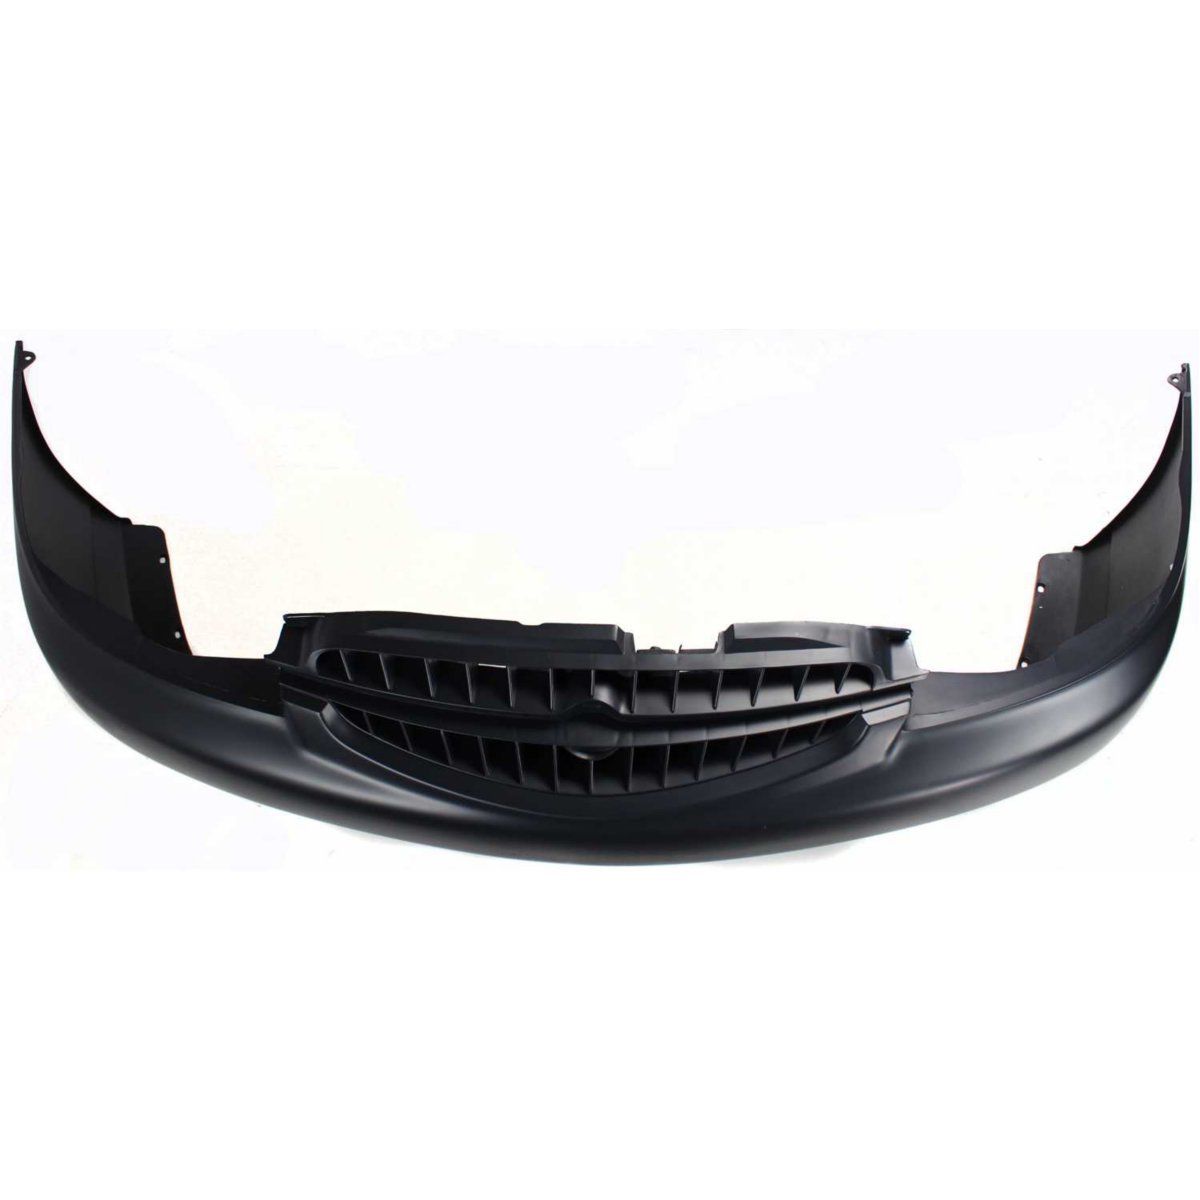 2000-2001 NISSAN ALTIMA Front Bumper Cover XE/GXE/GLE Painted to Match